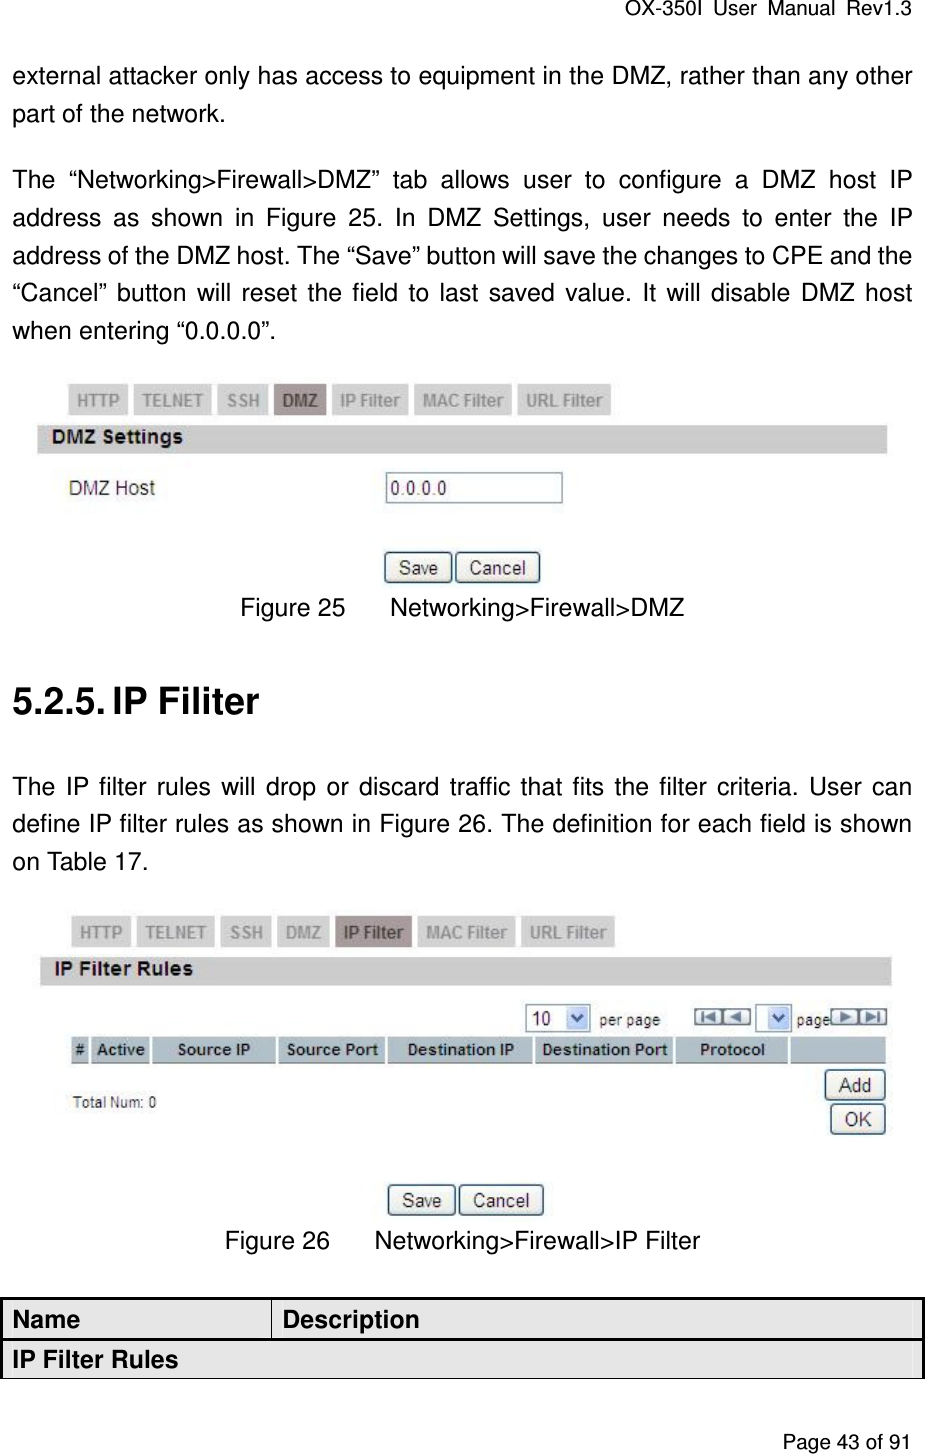 OX-350I  User  Manual  Rev1.3 Page 43 of 91 external attacker only has access to equipment in the DMZ, rather than any other part of the network. The  “Networking&gt;Firewall&gt;DMZ”  tab  allows  user  to  configure  a  DMZ  host  IP address  as  shown  in  Figure  25.  In  DMZ  Settings,  user  needs  to  enter  the  IP address of the DMZ host. The “Save” button will save the changes to CPE and the “Cancel”  button  will  reset  the field  to  last  saved  value.  It  will  disable  DMZ  host when entering “0.0.0.0”.  Figure 25  Networking&gt;Firewall&gt;DMZ 5.2.5. IP Filiter The  IP filter  rules  will  drop  or  discard  traffic that  fits  the  filter  criteria.  User  can define IP filter rules as shown in Figure 26. The definition for each field is shown on Table 17.  Figure 26  Networking&gt;Firewall&gt;IP Filter Name  Description IP Filter Rules 